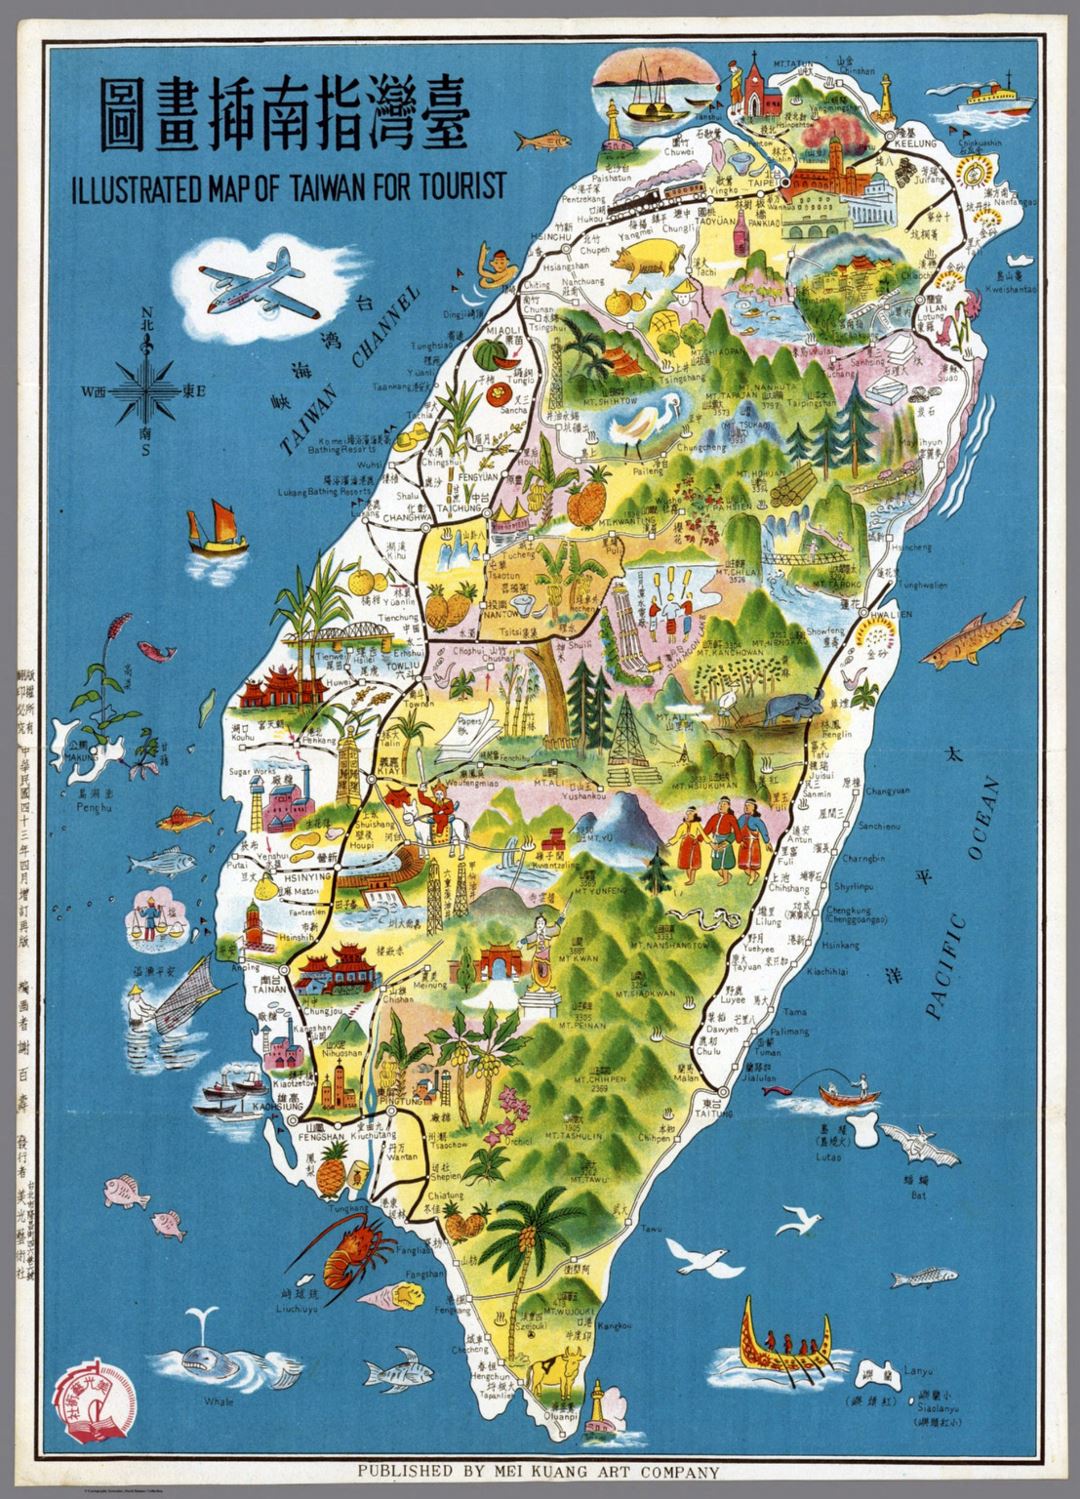 Detaield tourist illustrated map of Taiwan